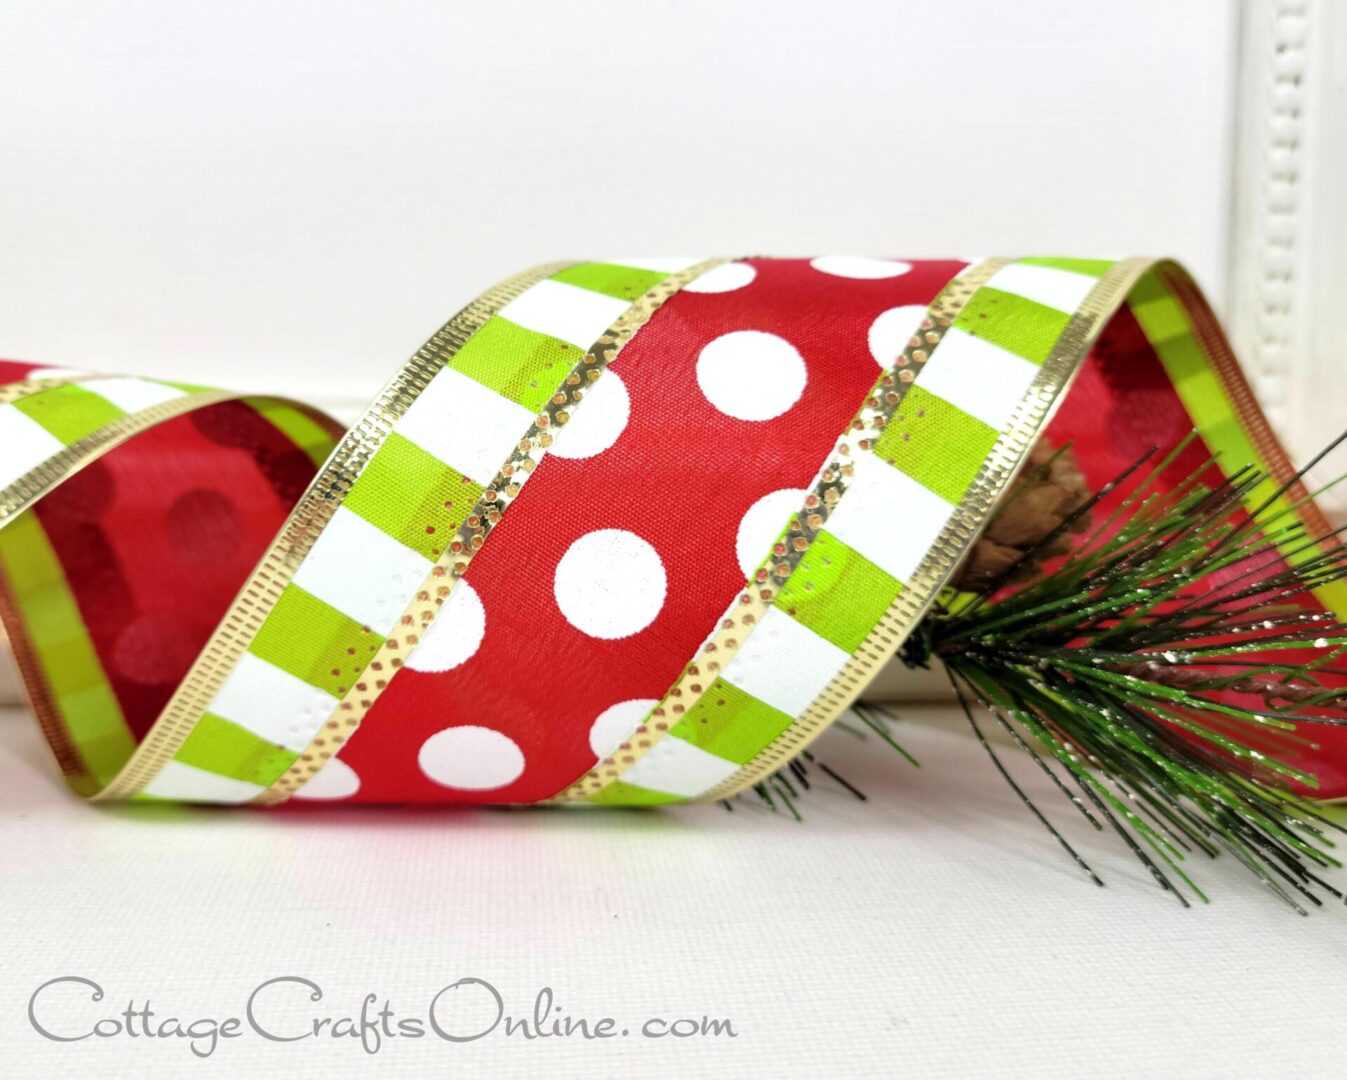 White dots on red with lime green and white striped edge 2.5" wide wired ribbon from the Etsy shop of Cottage Crafts Online.